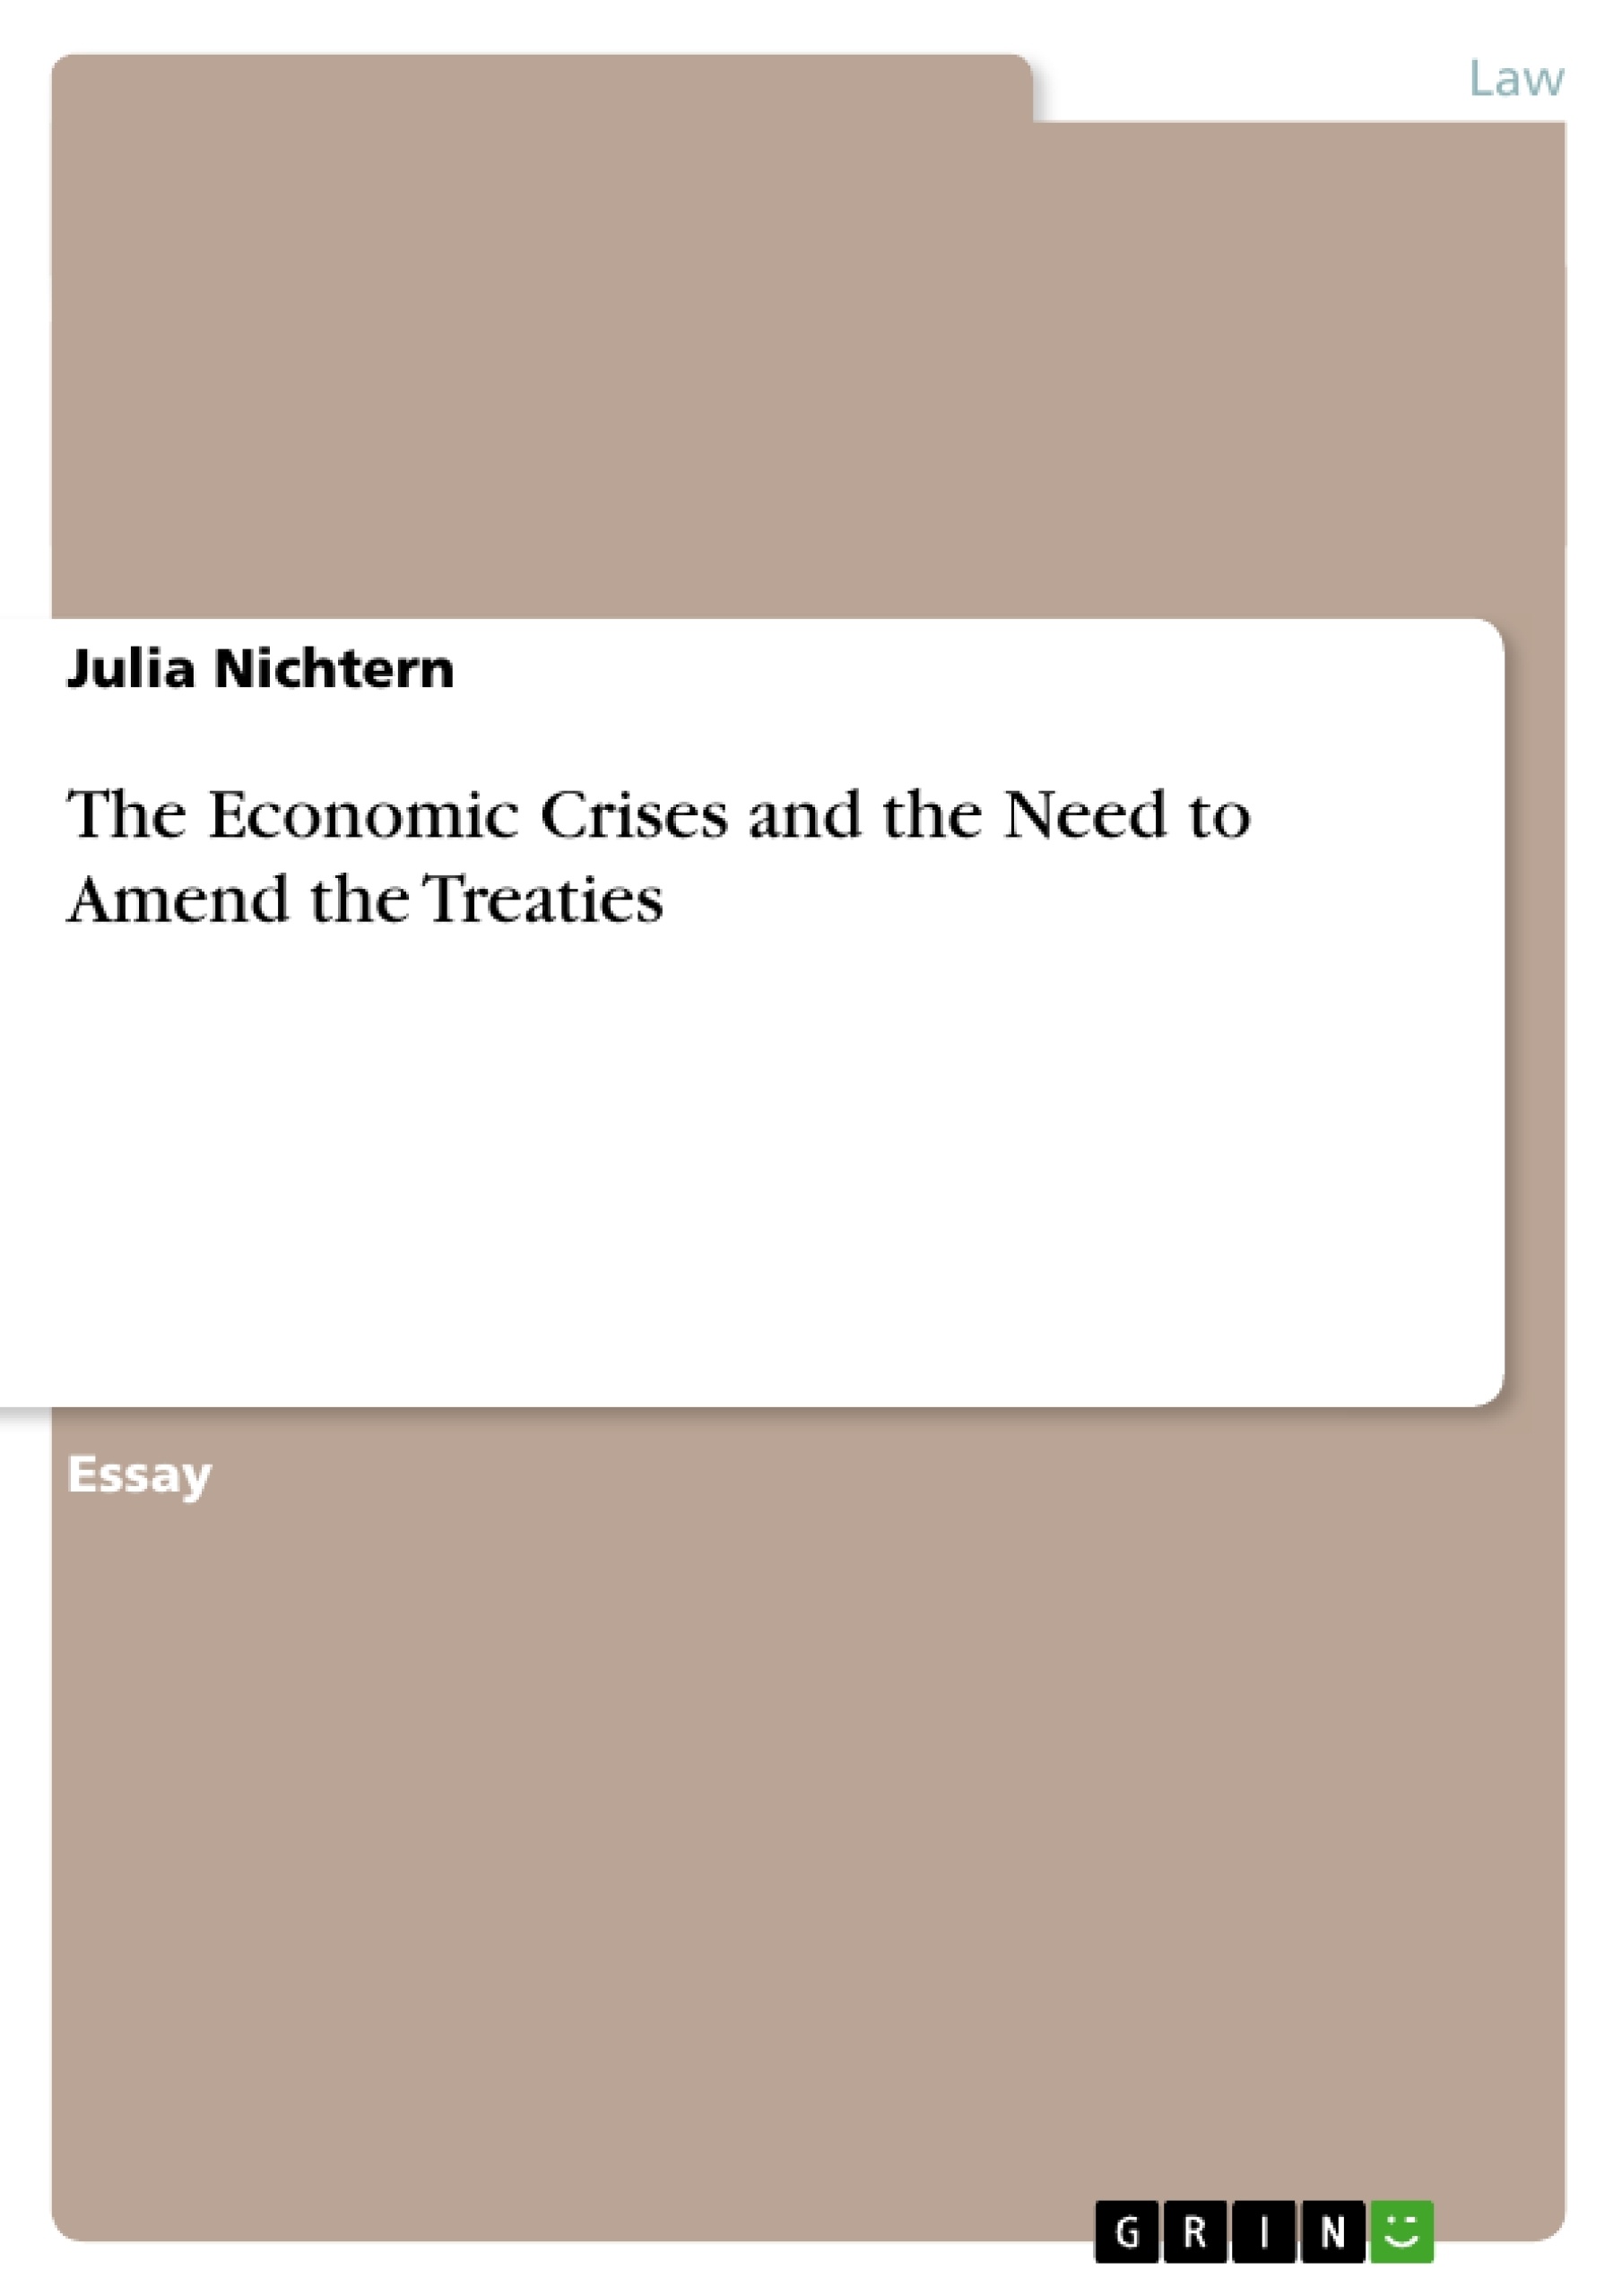 Titel: The Economic Crises and the Need to Amend the Treaties